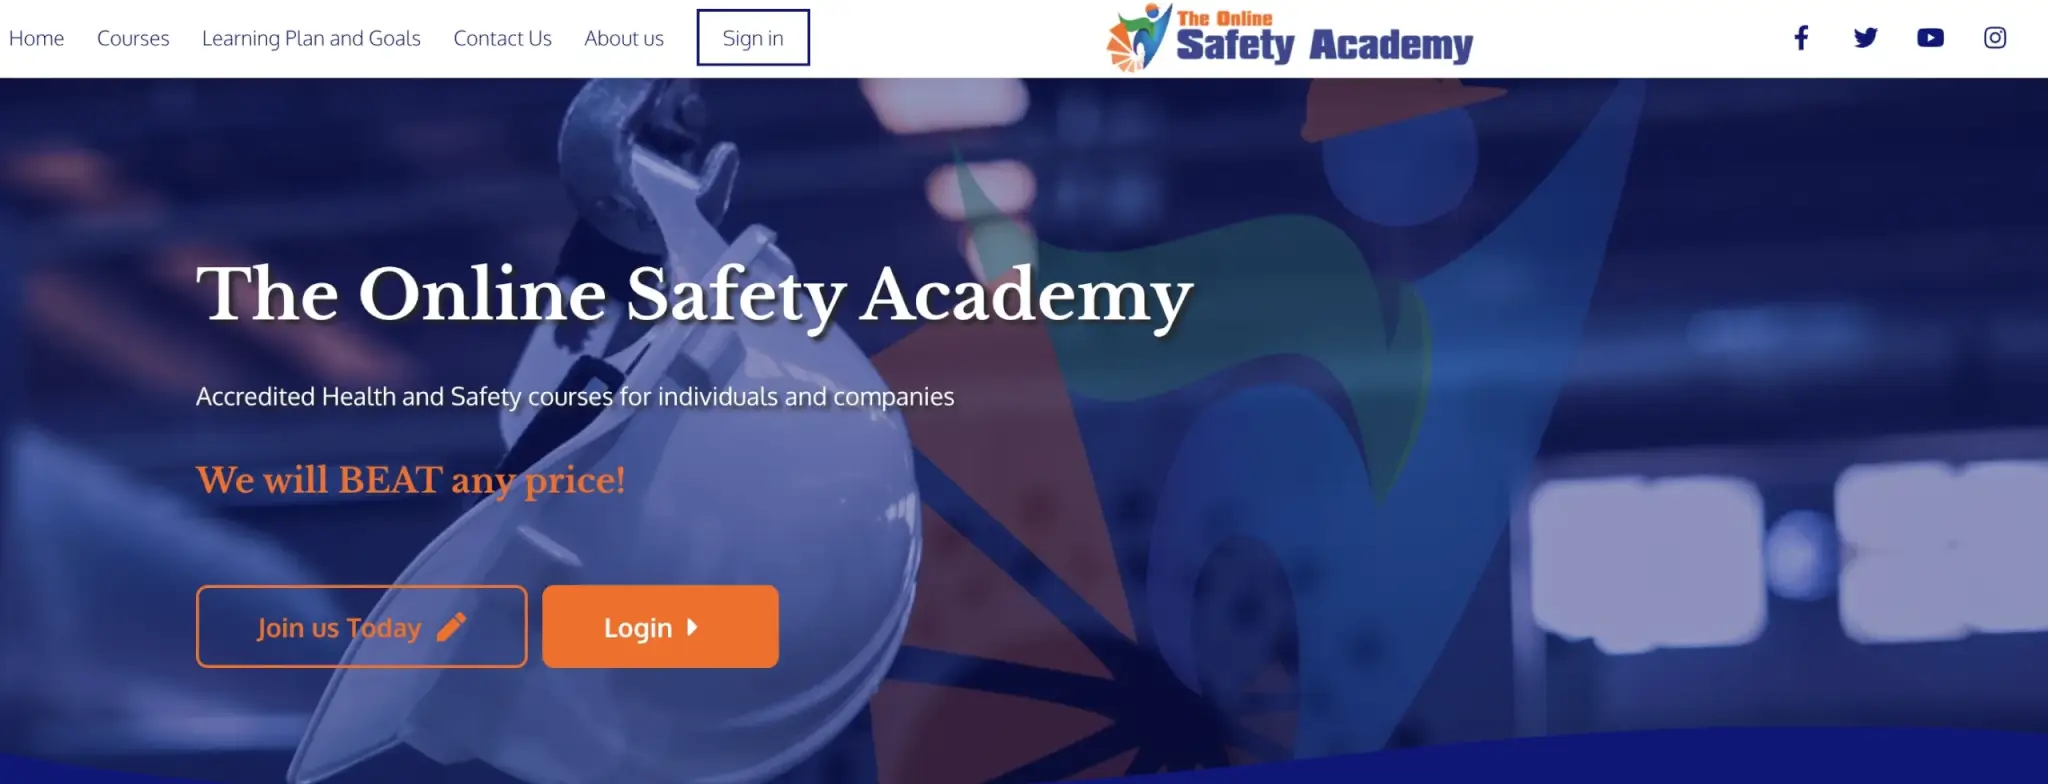 Screnshot from the online safety academy home page showing the buttons to join